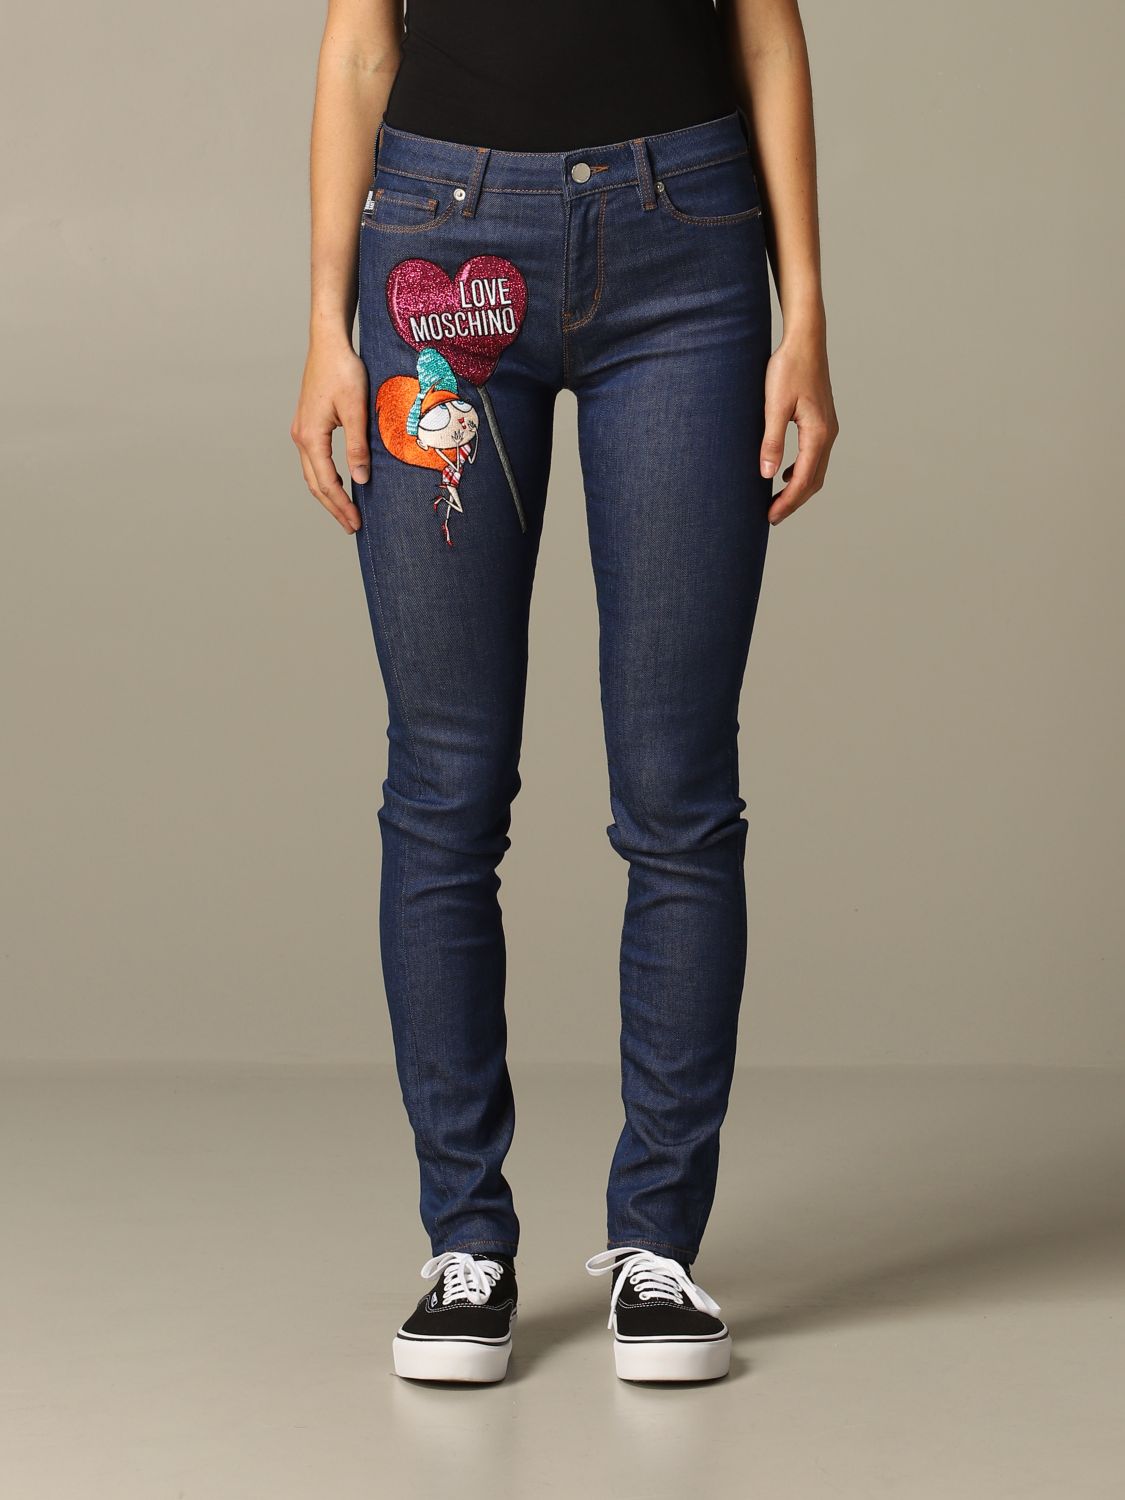 Jeans Love Moschino WQ38747 S3409 Giglio EN